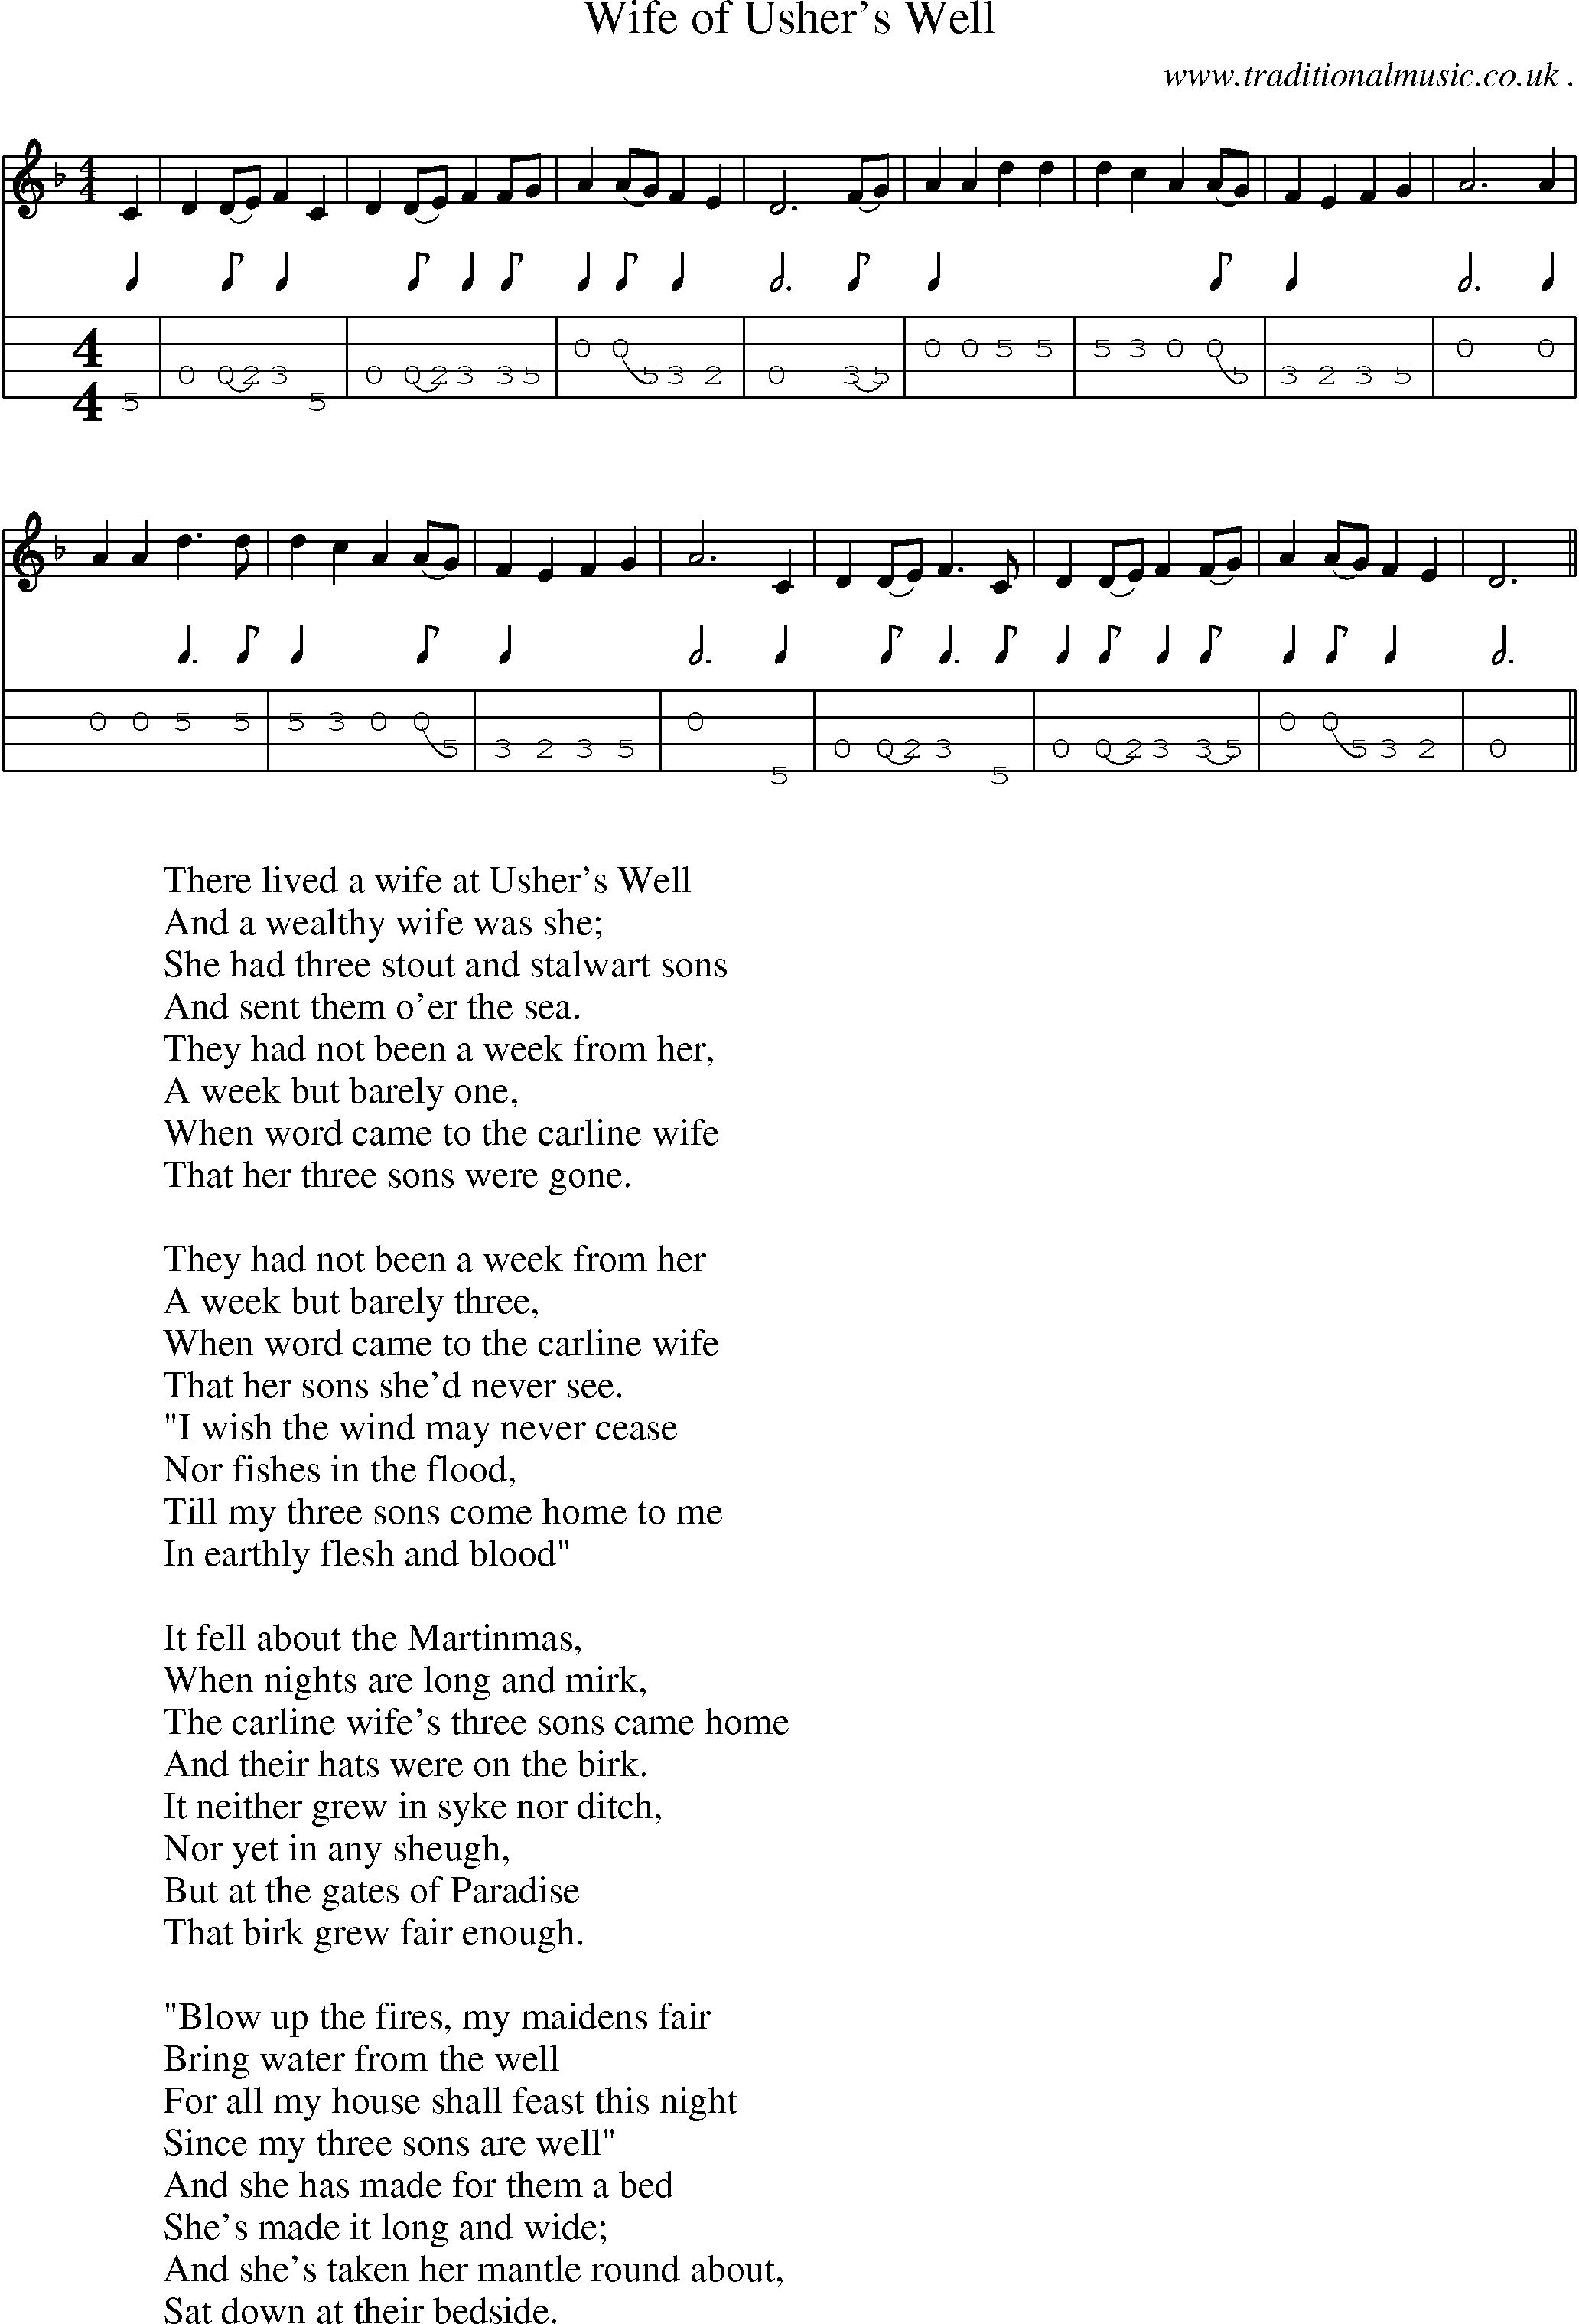 Sheet-Music and Mandolin Tabs for Wife Of Ushers Well